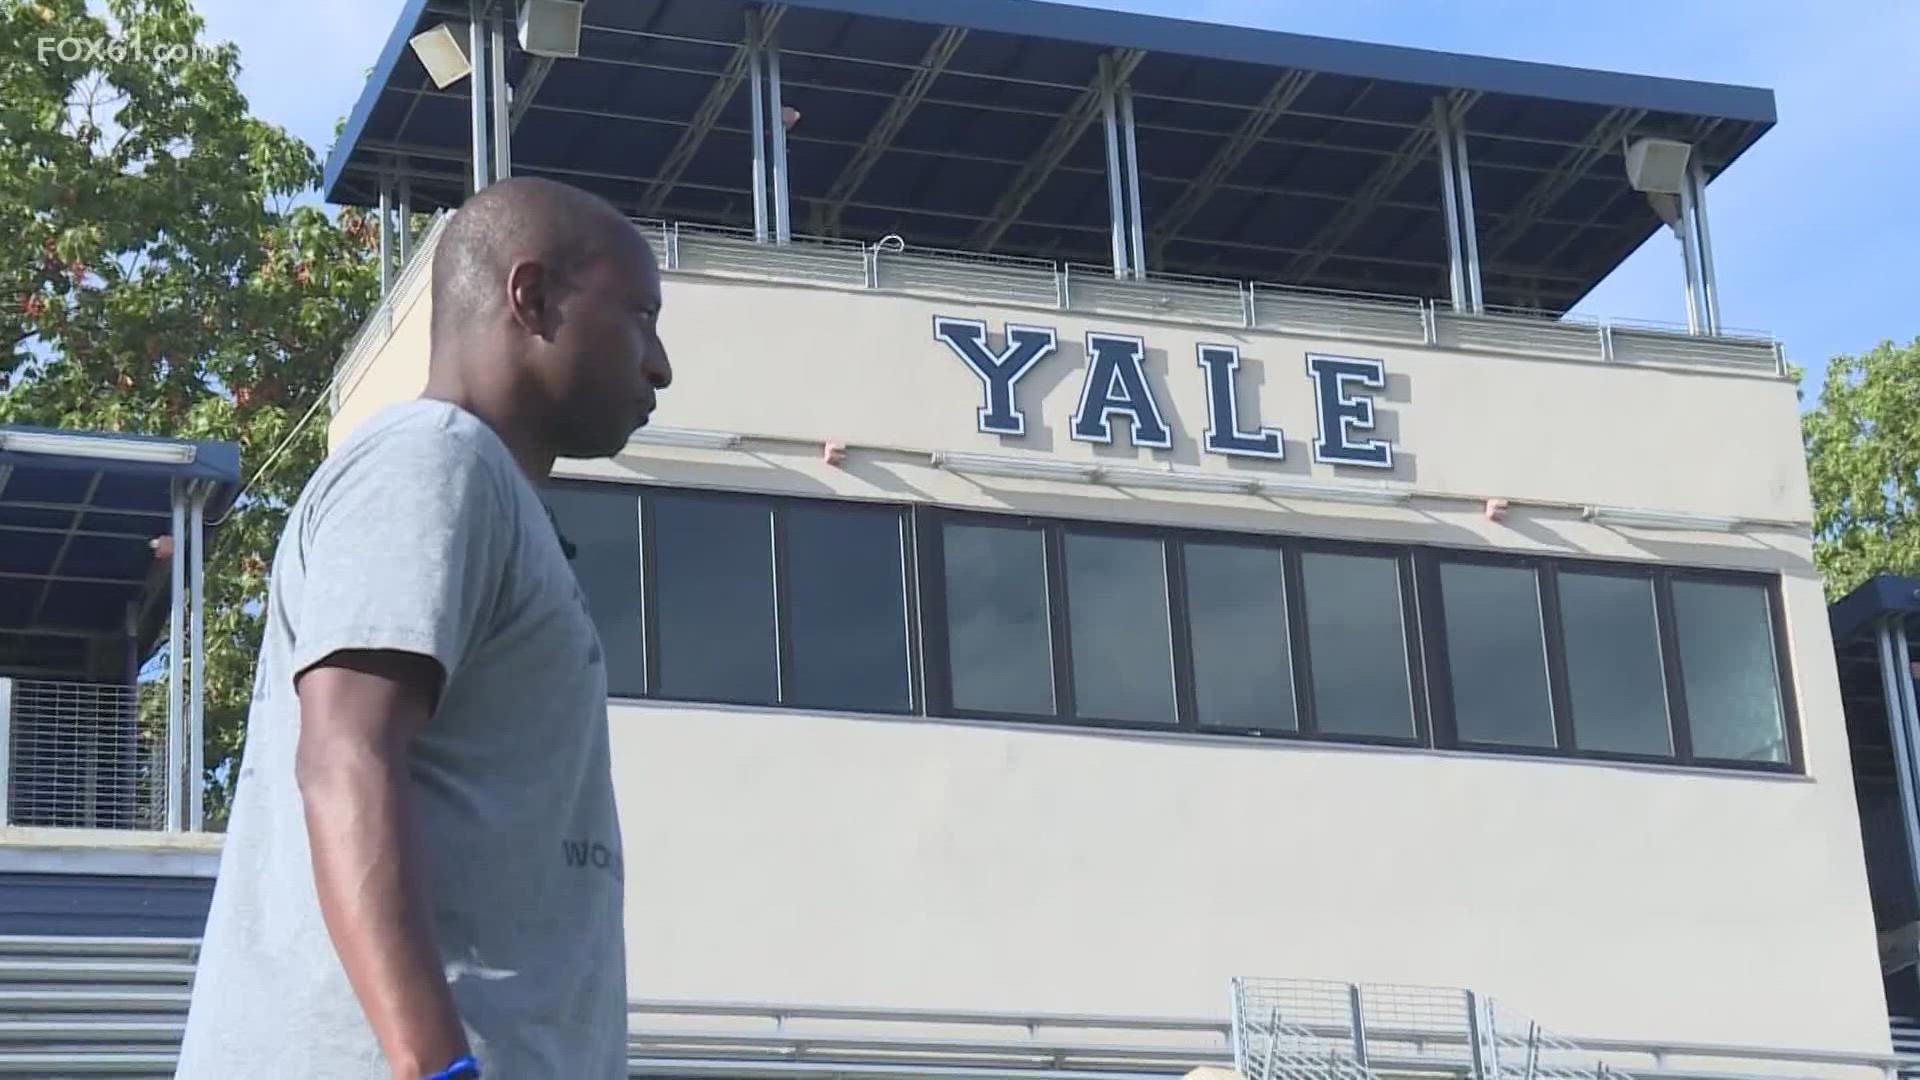 Ex-Yale coach sentenced 5 months in prison 